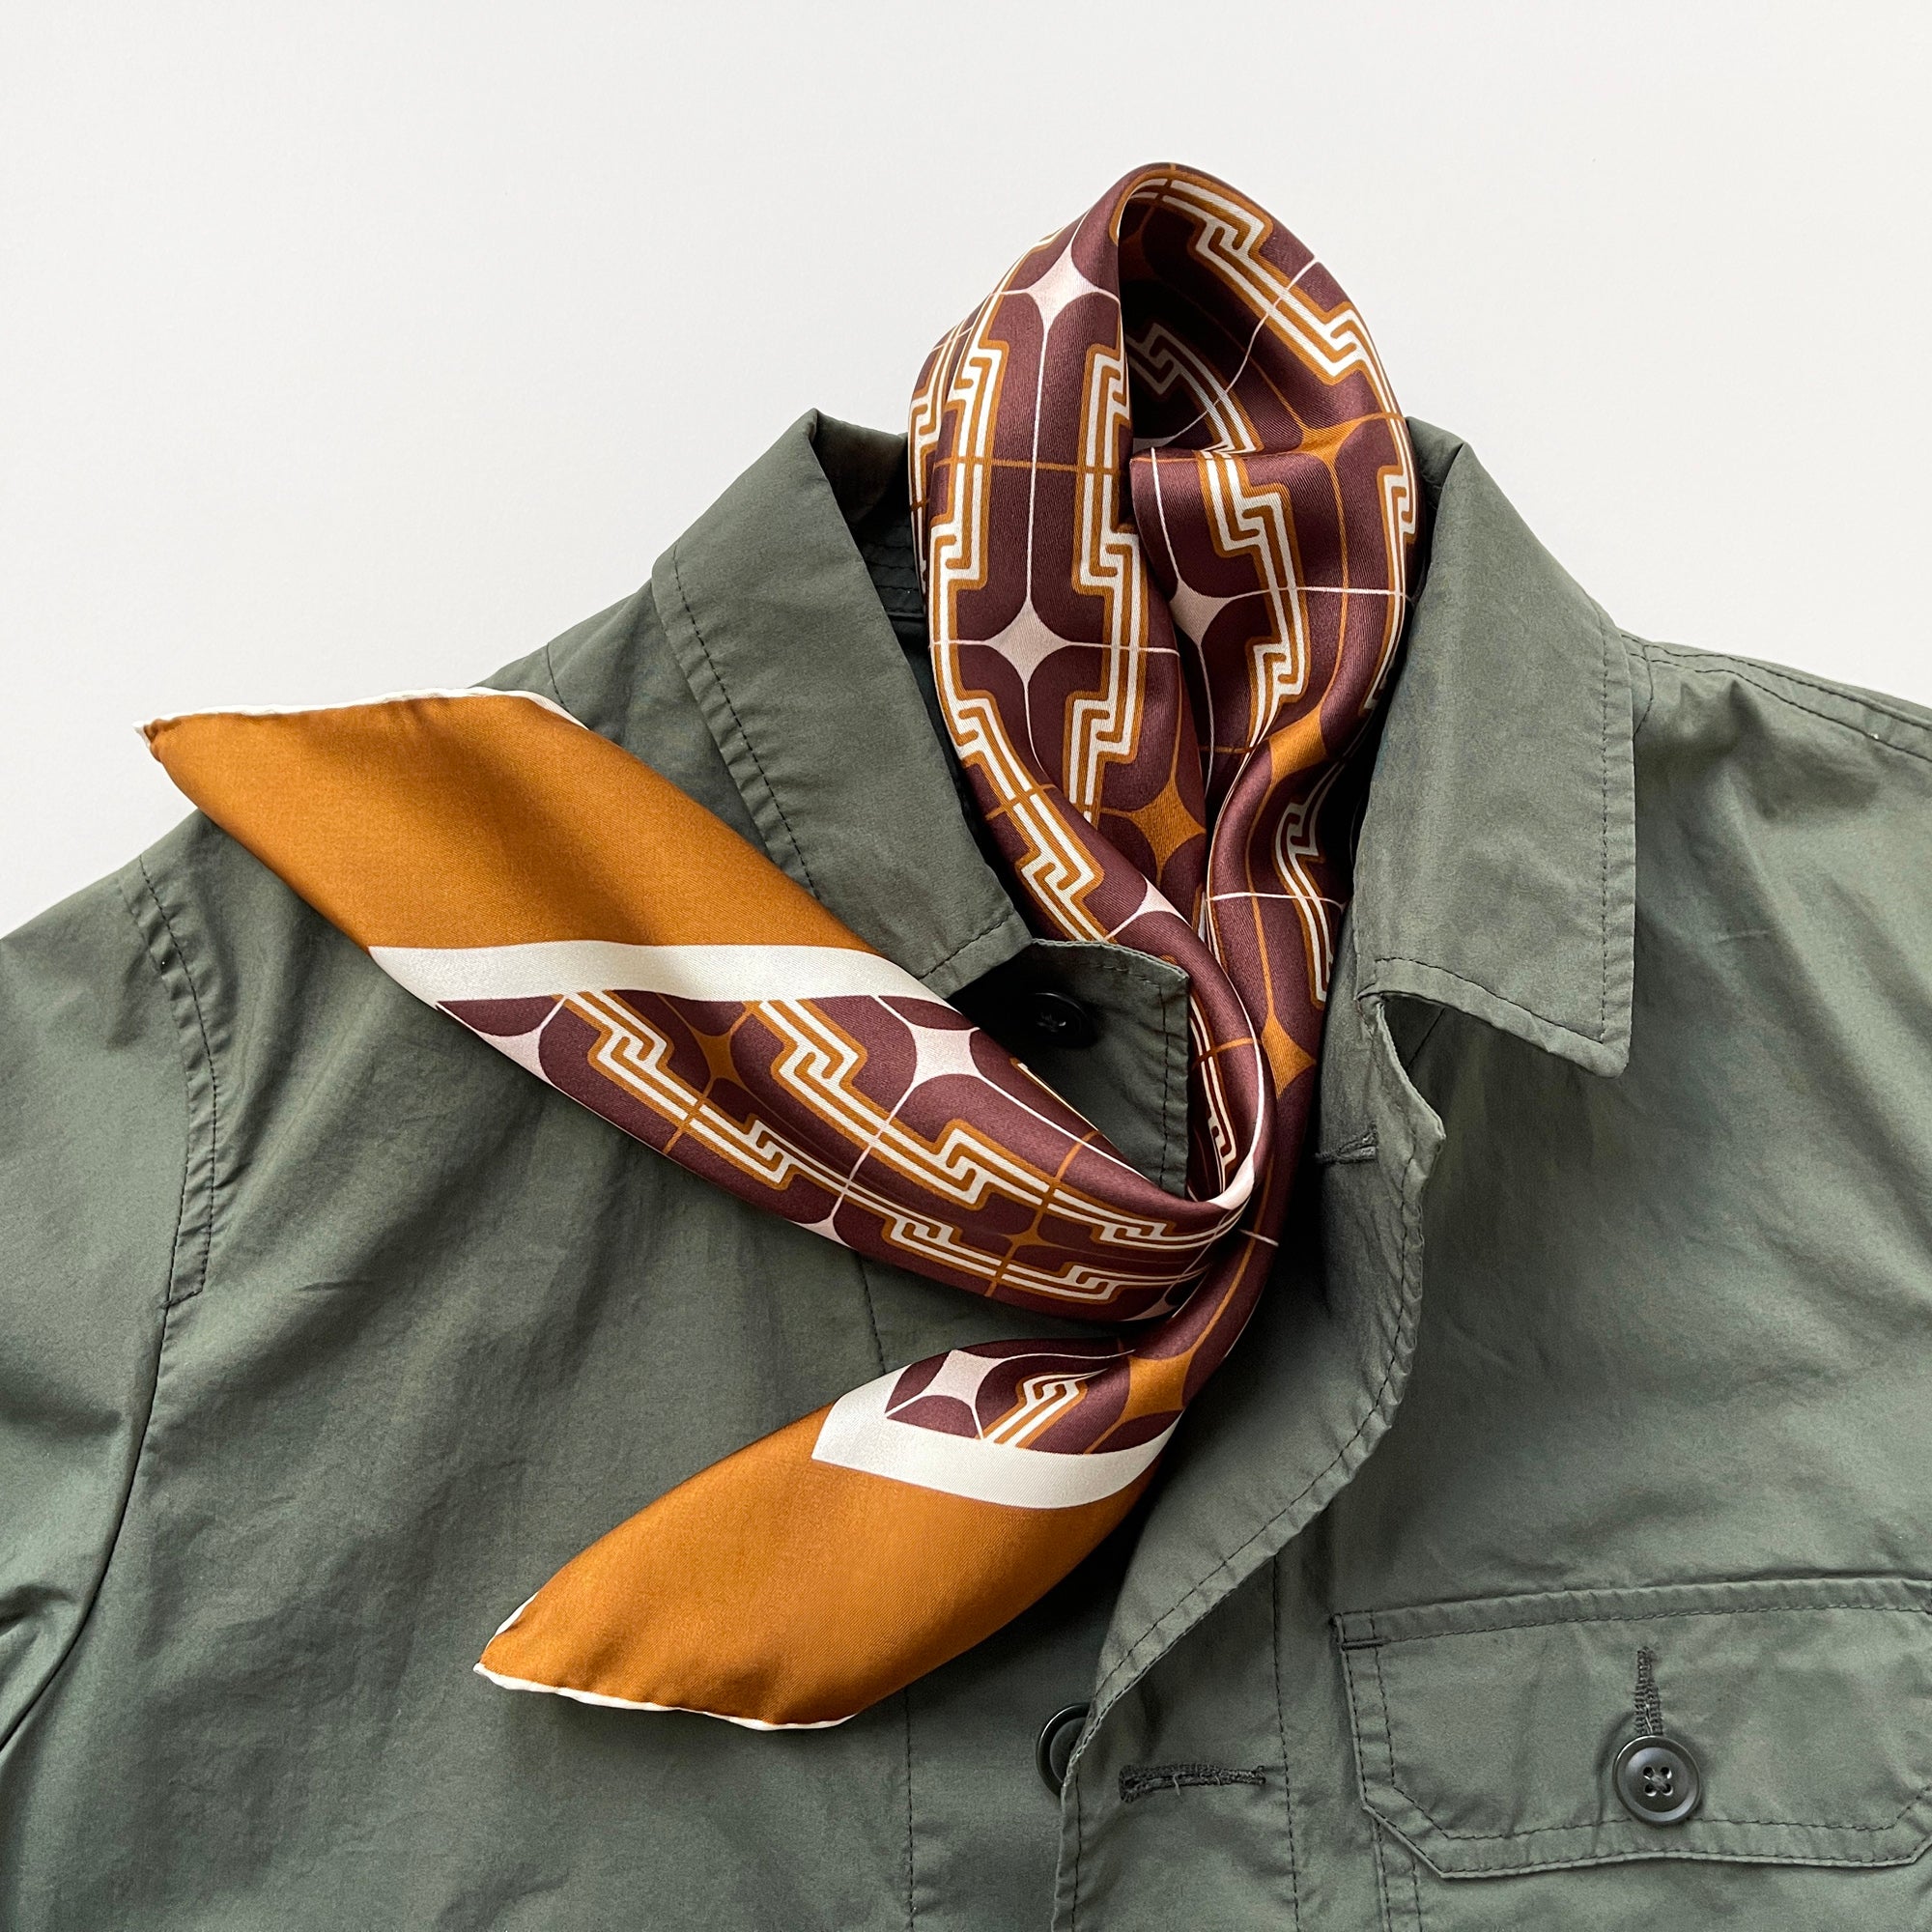 a luxury silk scarf featuring vintage charm 70s style patten in burgundy, tan and beige palette with hand-rolled hems, paired with a army green men's jacket